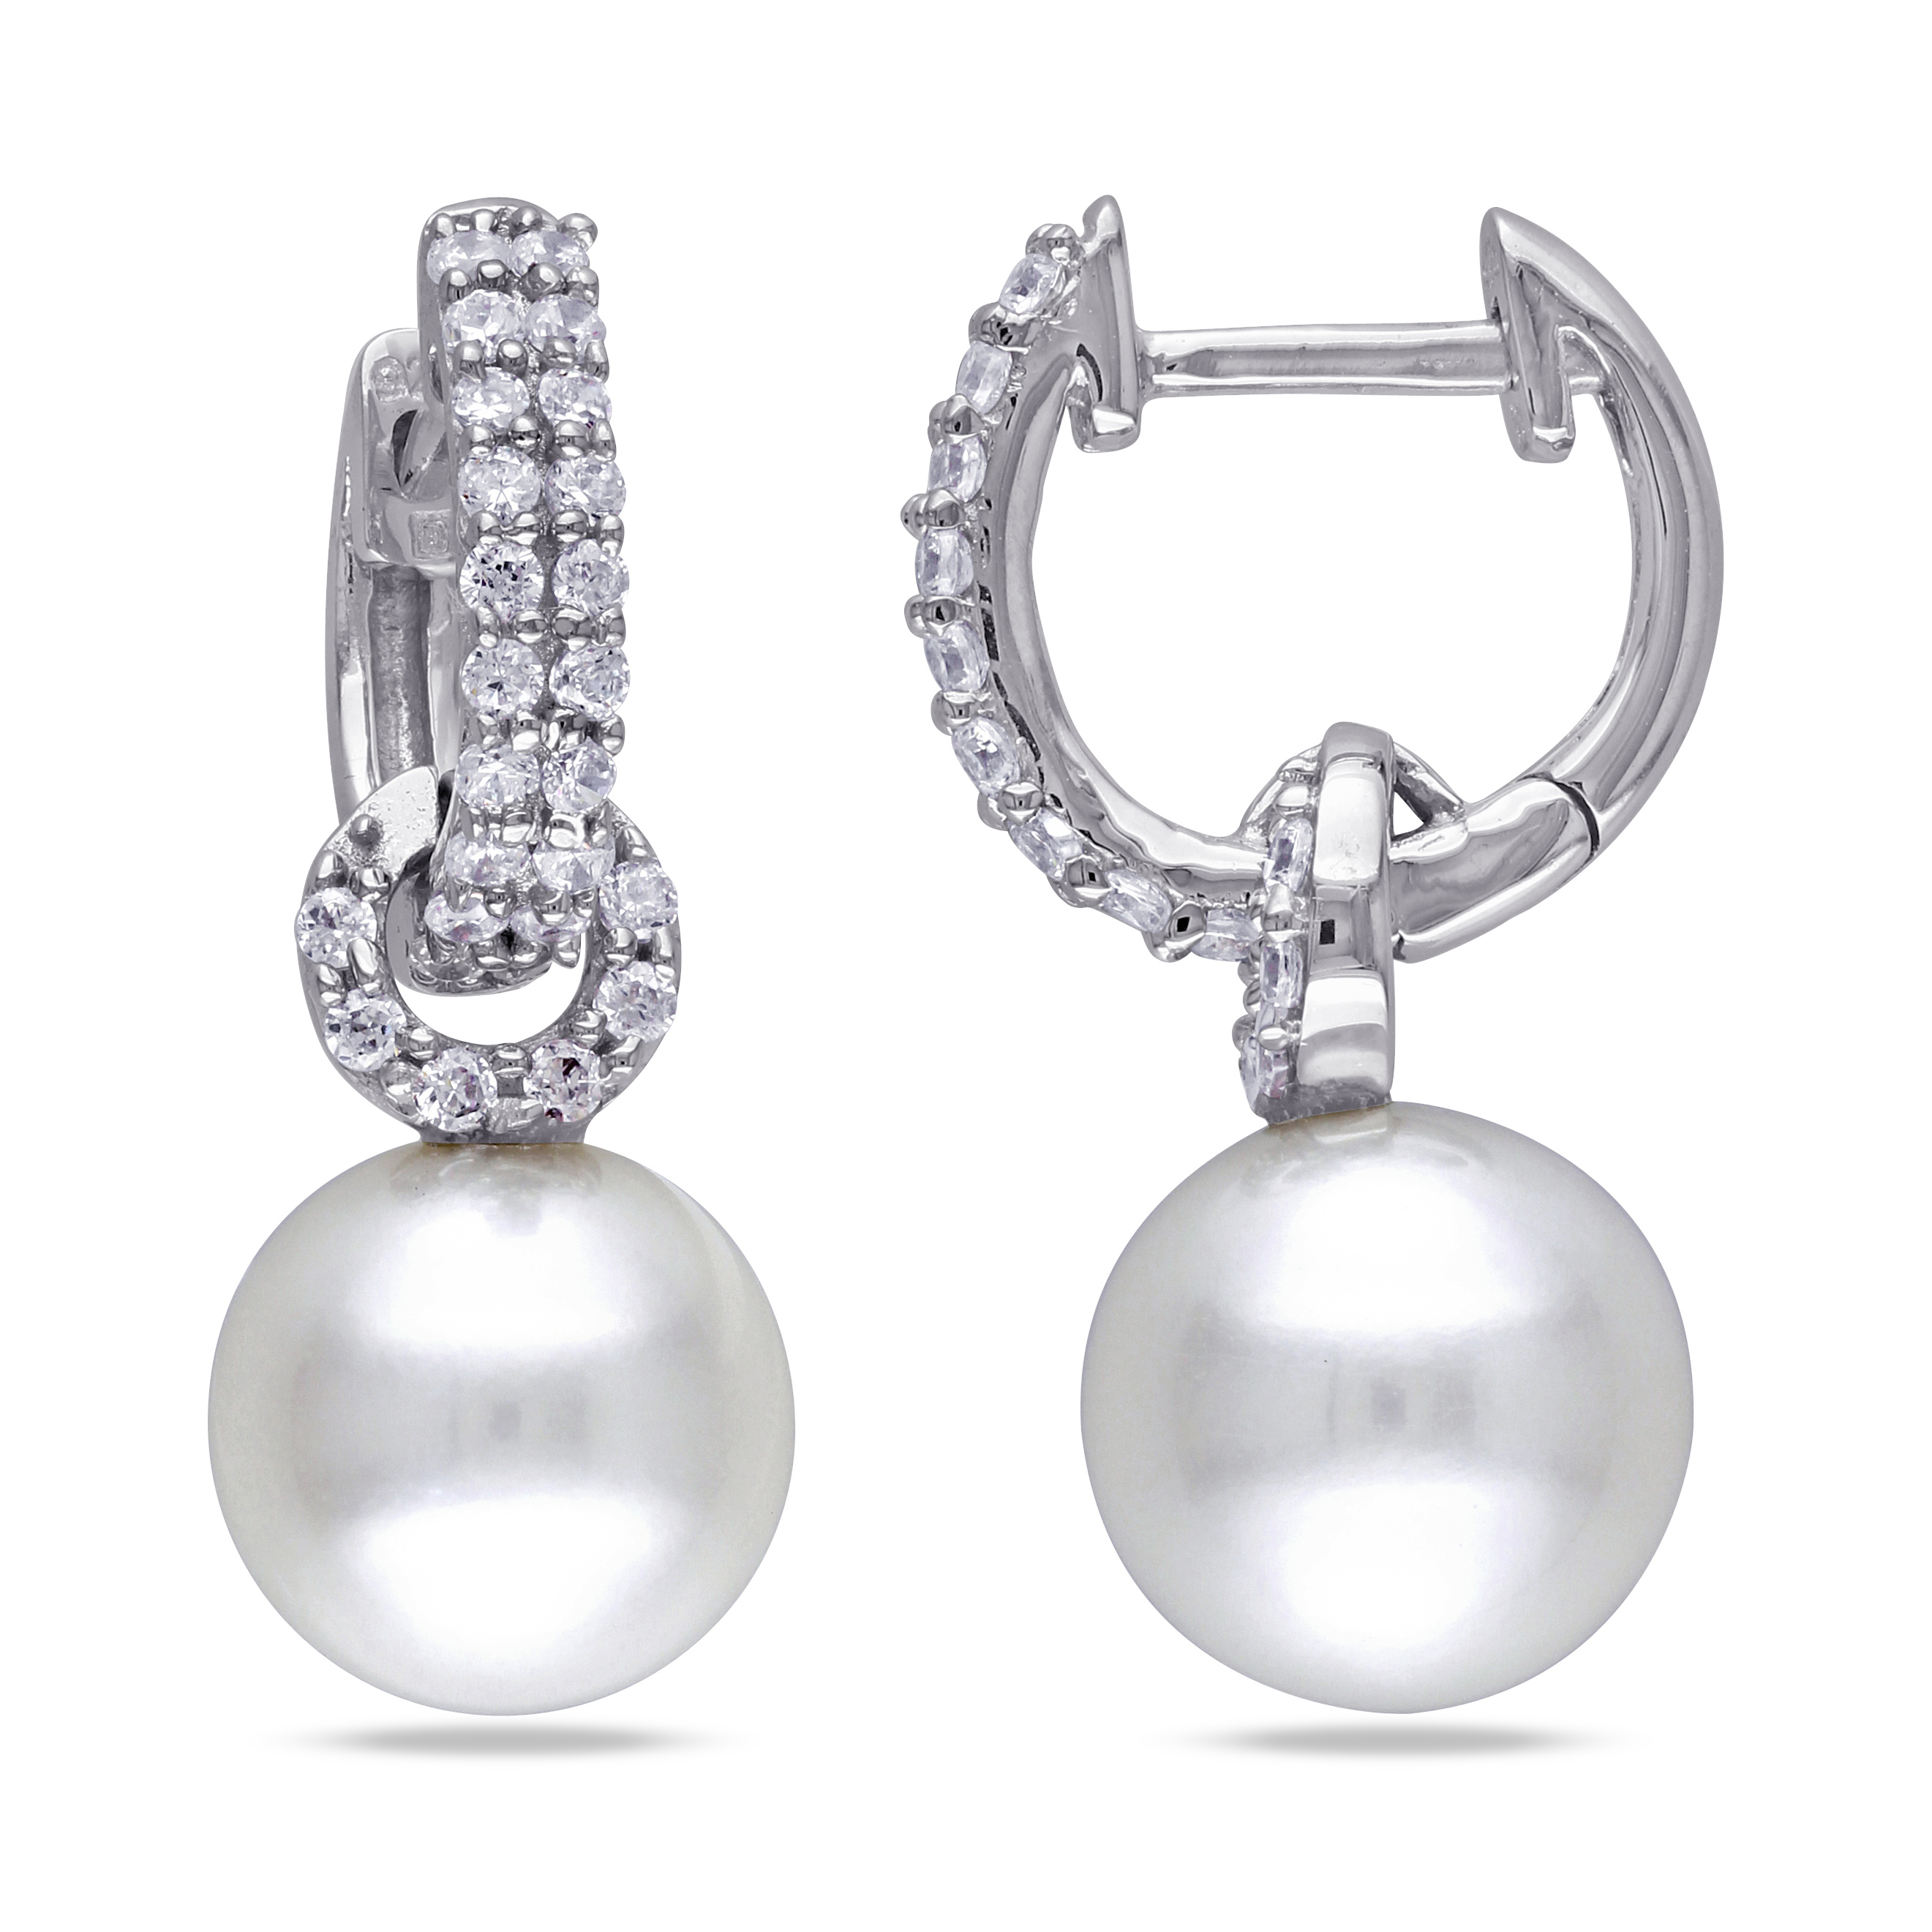 8 - 8.5 MM White Cultured Freshwater Pearl with Cubic Zirconia Earrings in Sterling Silver